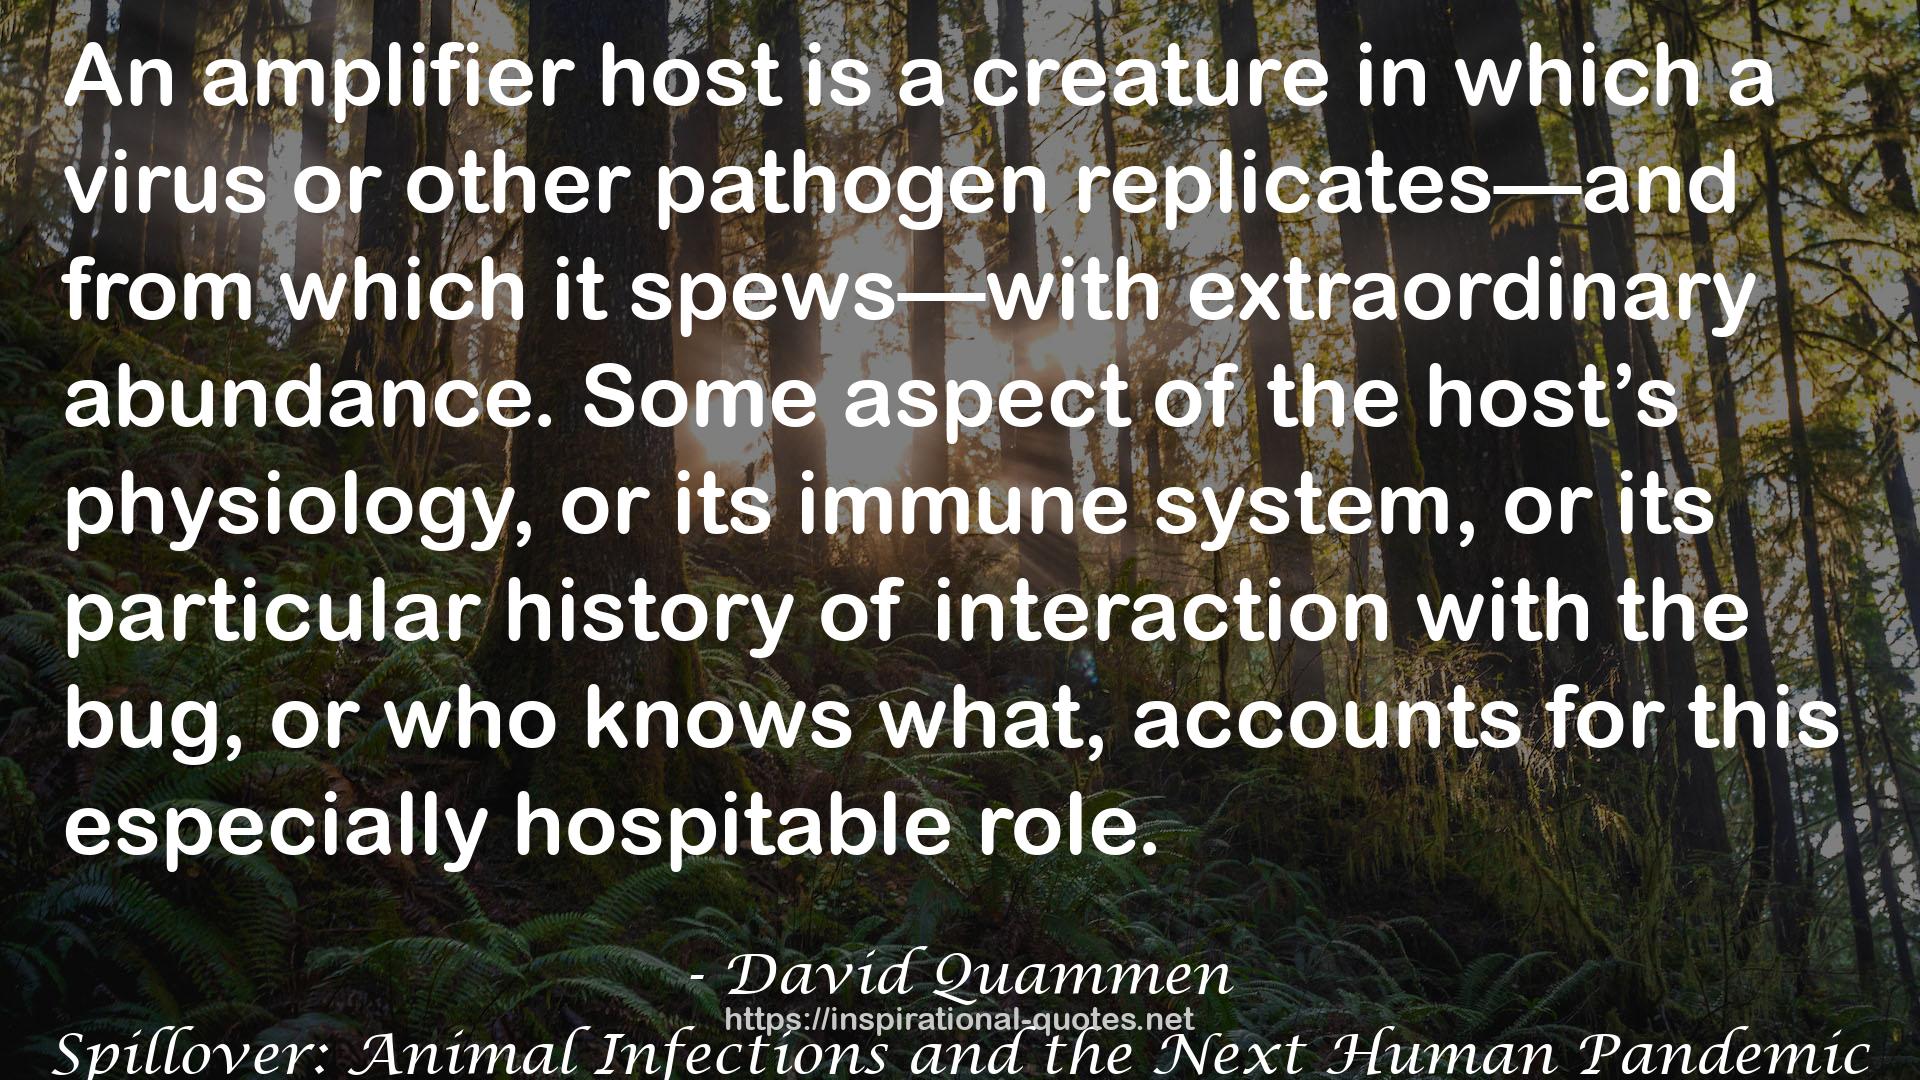 Spillover: Animal Infections and the Next Human Pandemic QUOTES